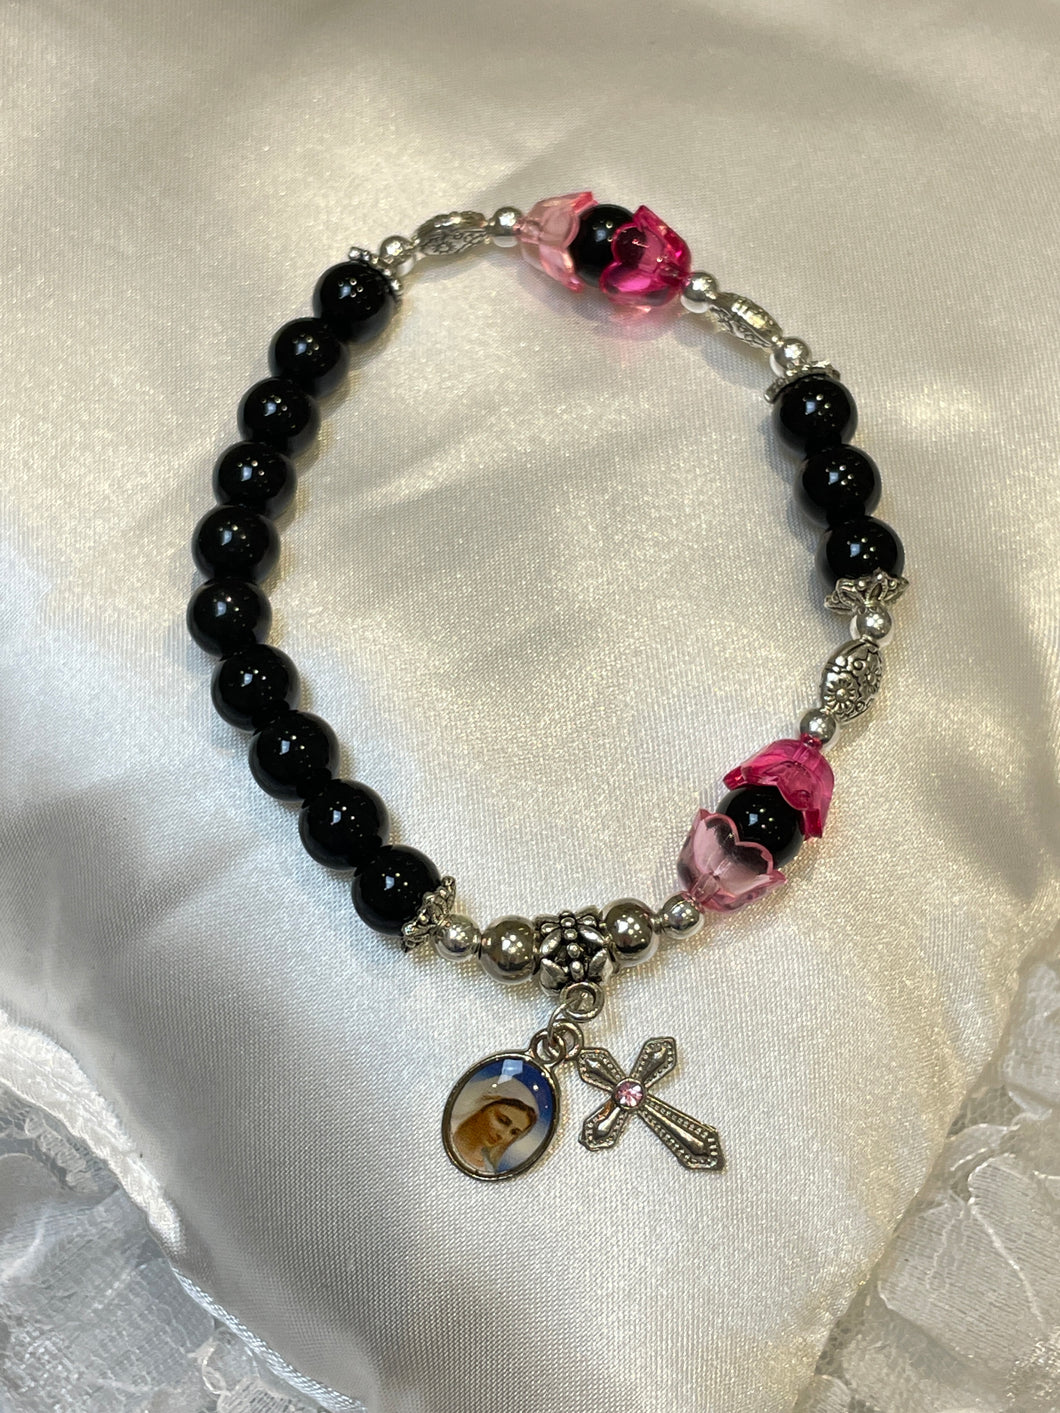 Black and Pink Tulip Rosary Bracelet with Charms